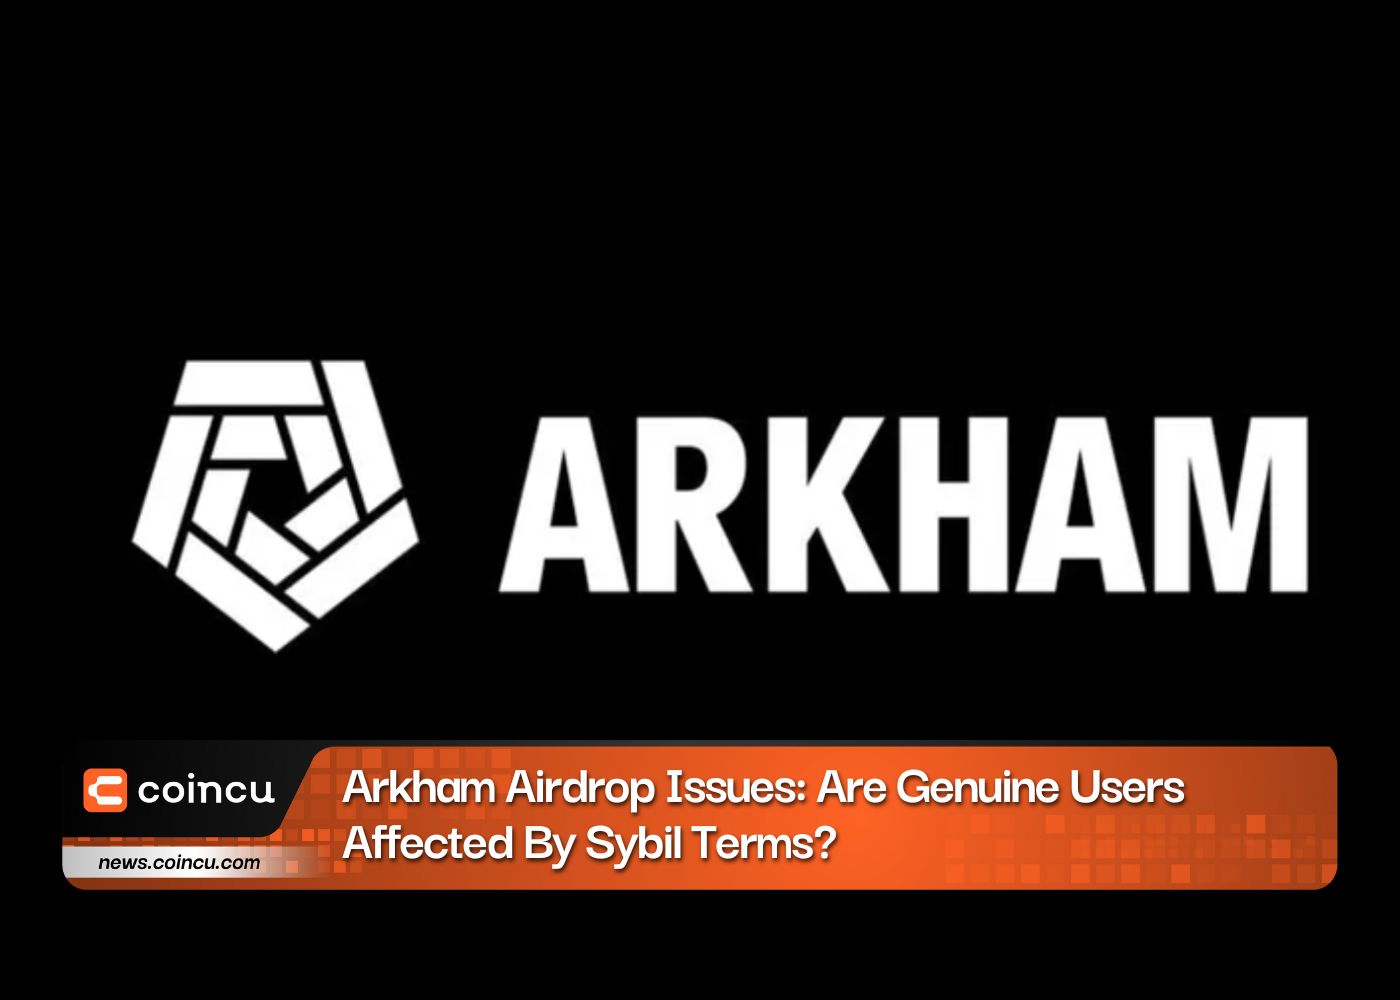 Arkham Airdrop Issues: Are Genuine Users Affected By Sybil Terms?